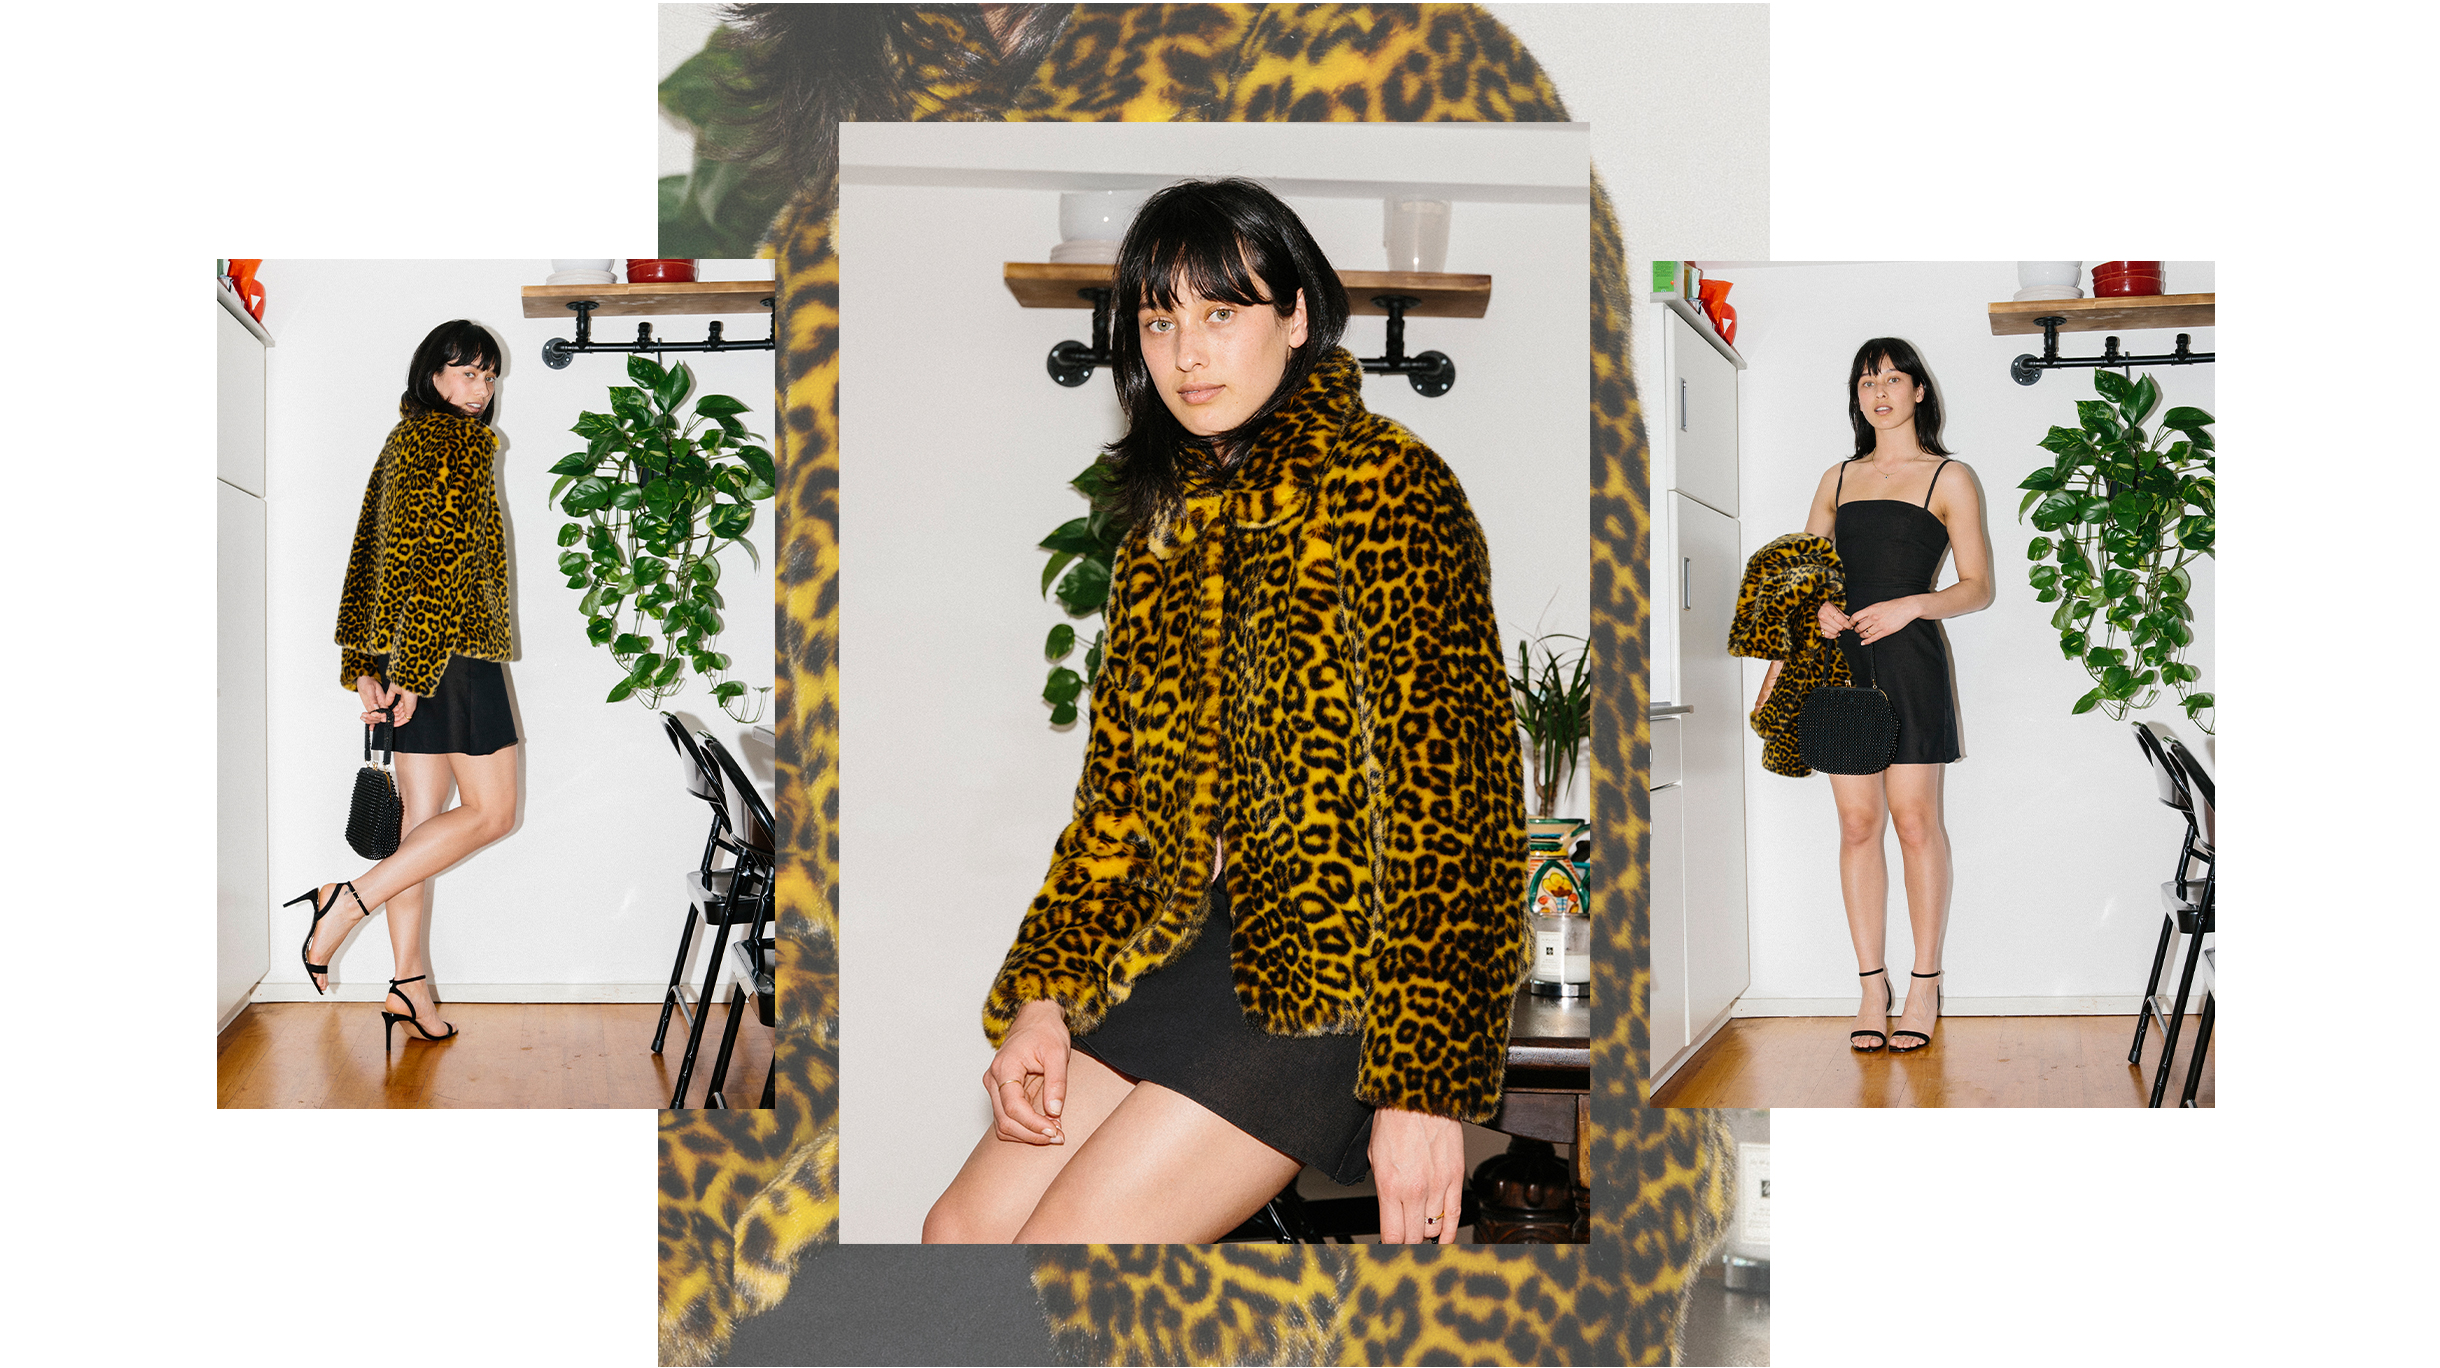 Lydia Graham style: wearing a leopard print jacket and black dress